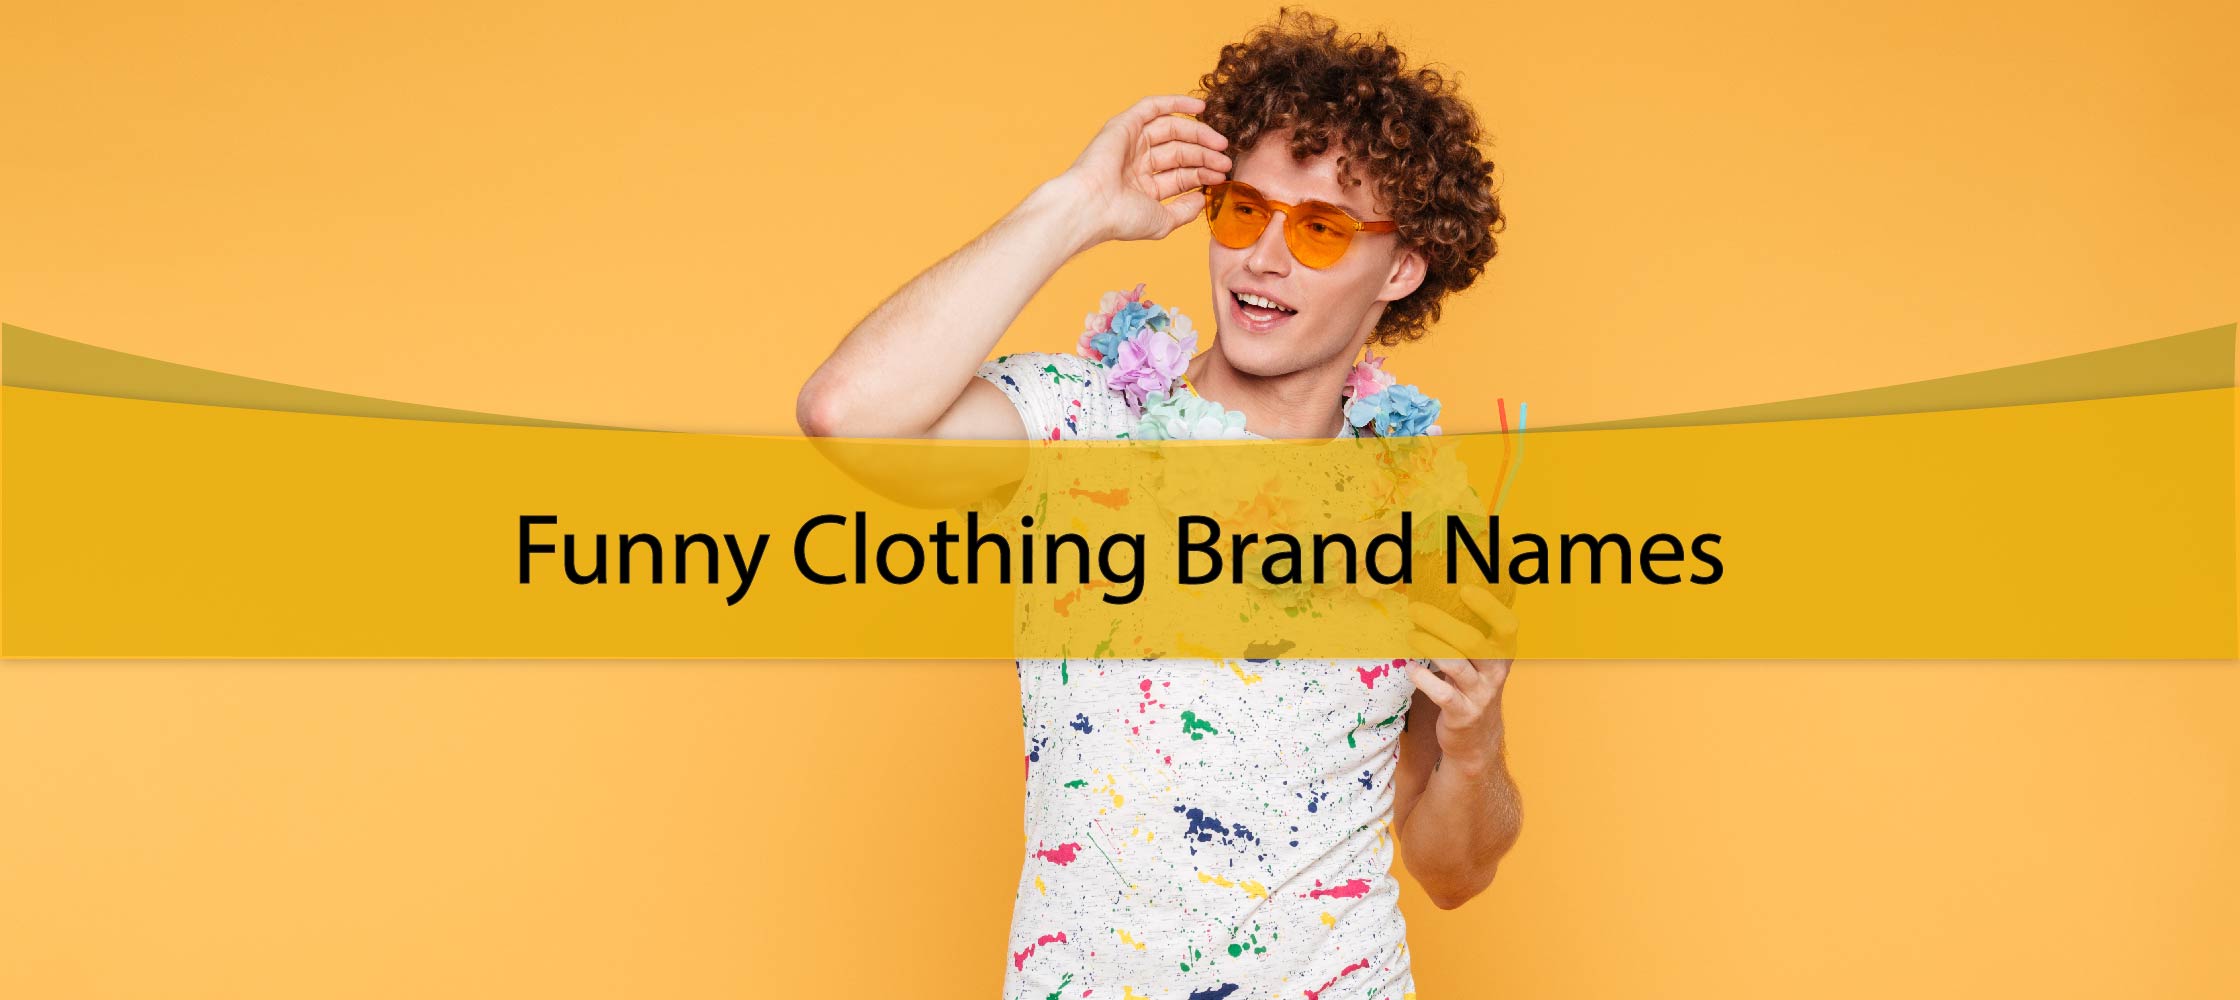 Funny Clothing Brand Names